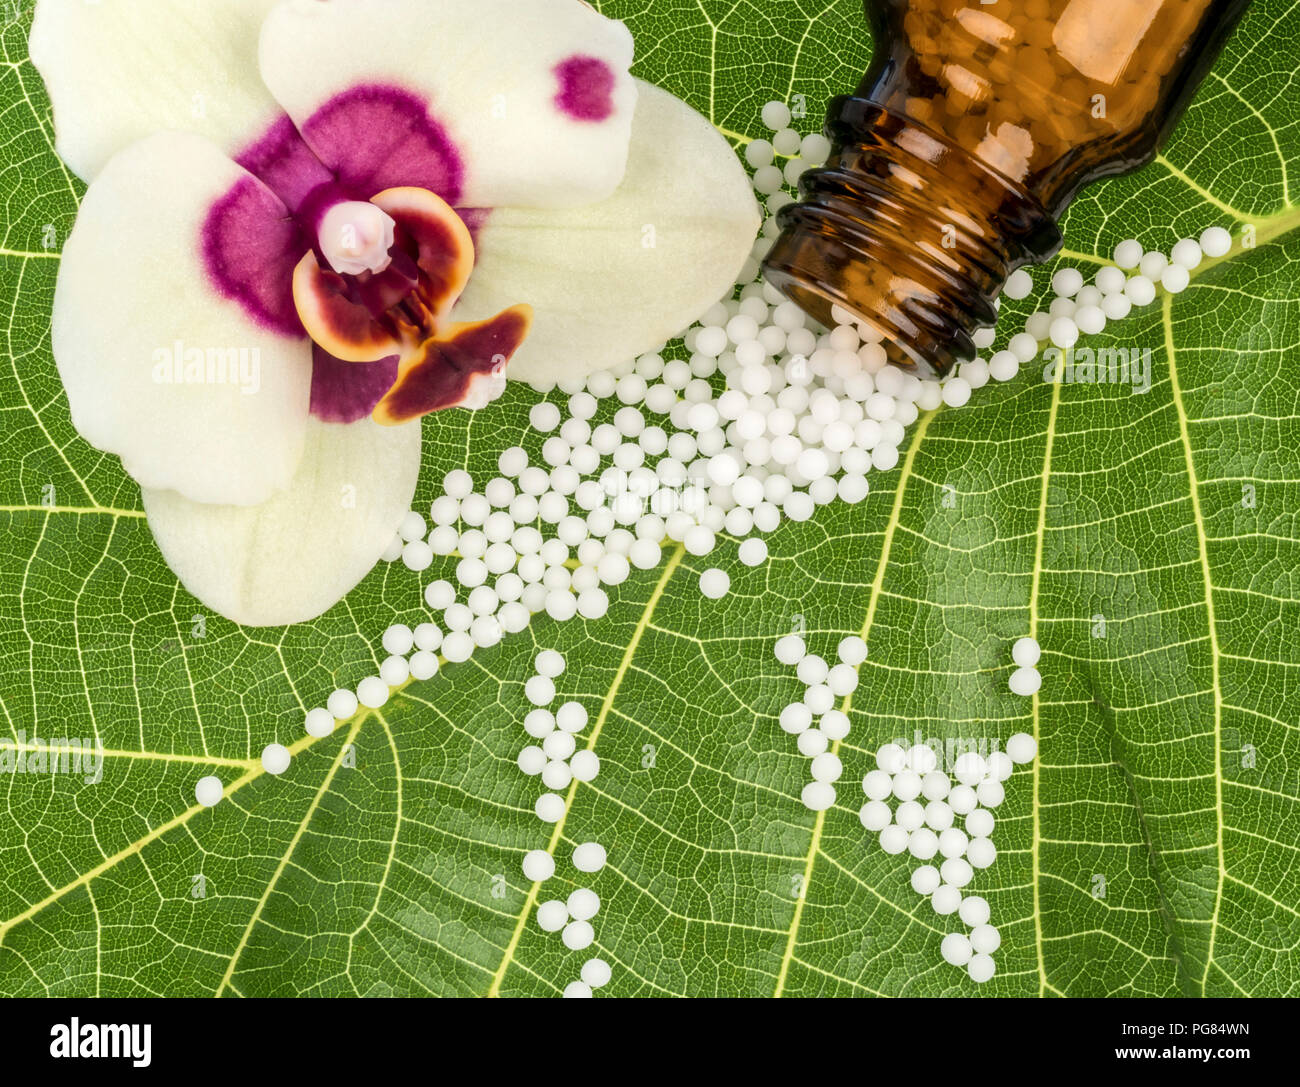 Globuli on green leaf, orchid blossom, apothecary bottle Stock Photo